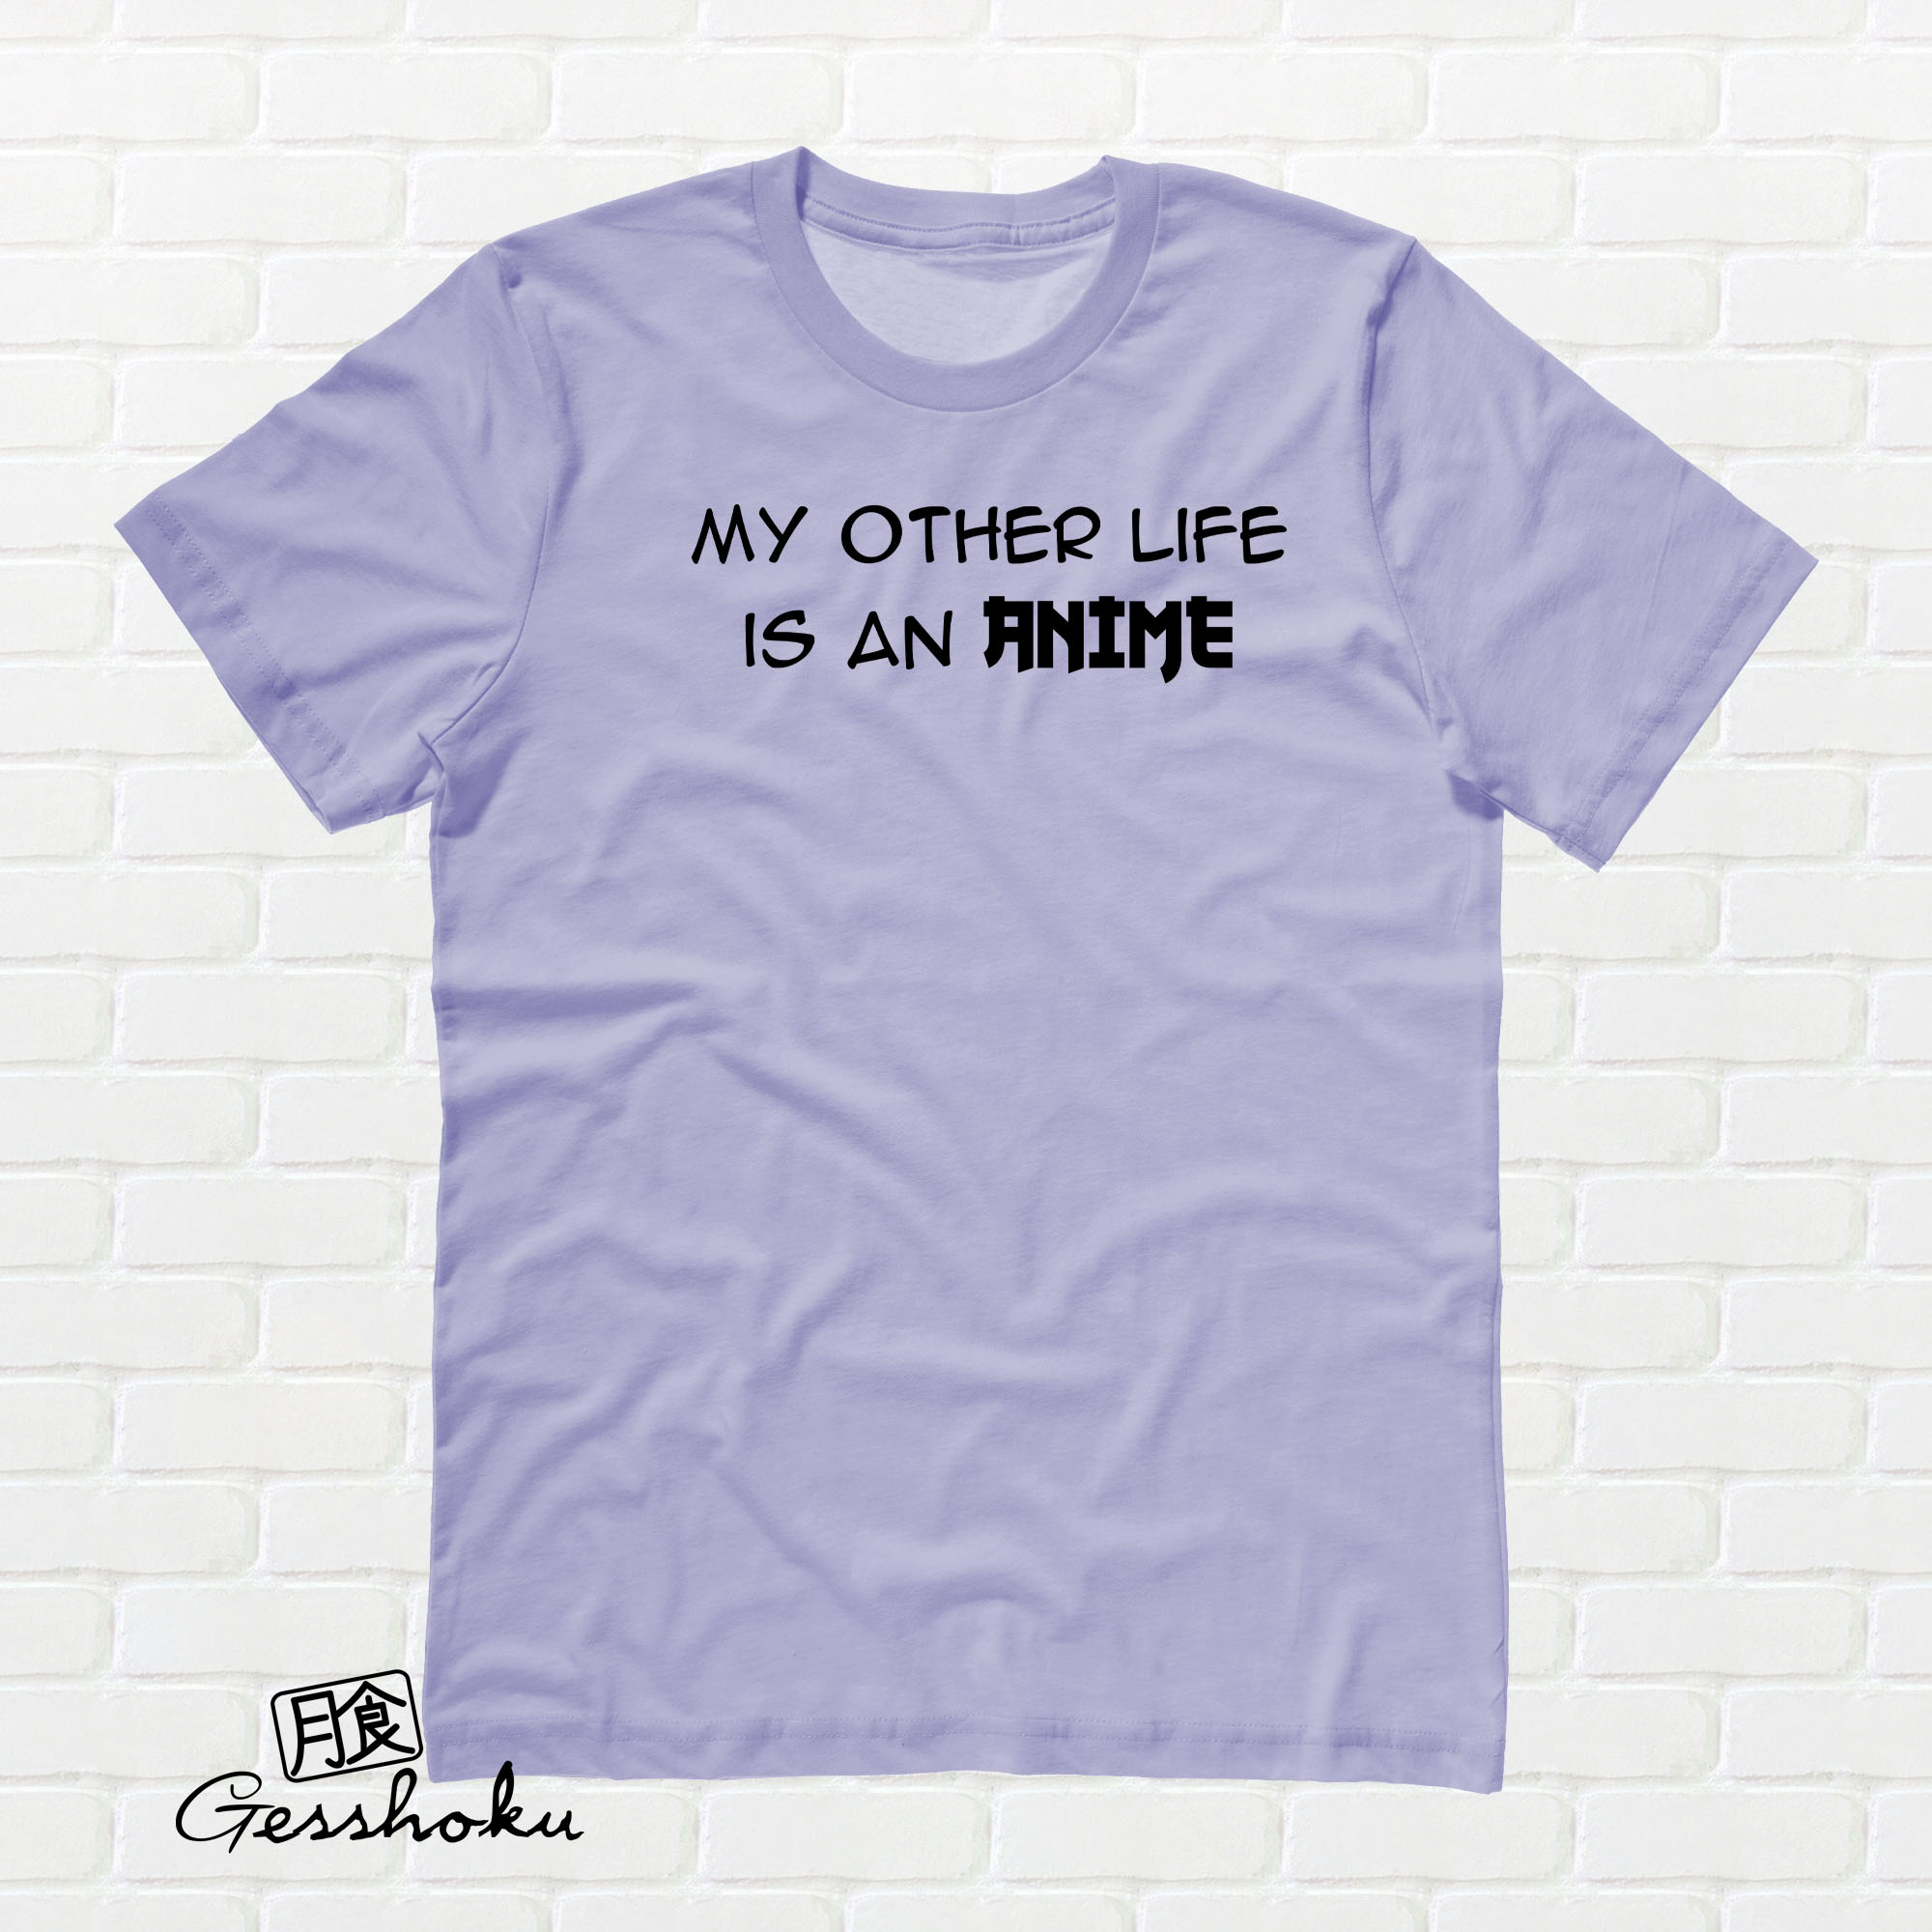 My Other Life is an Anime T-shirt - Violet